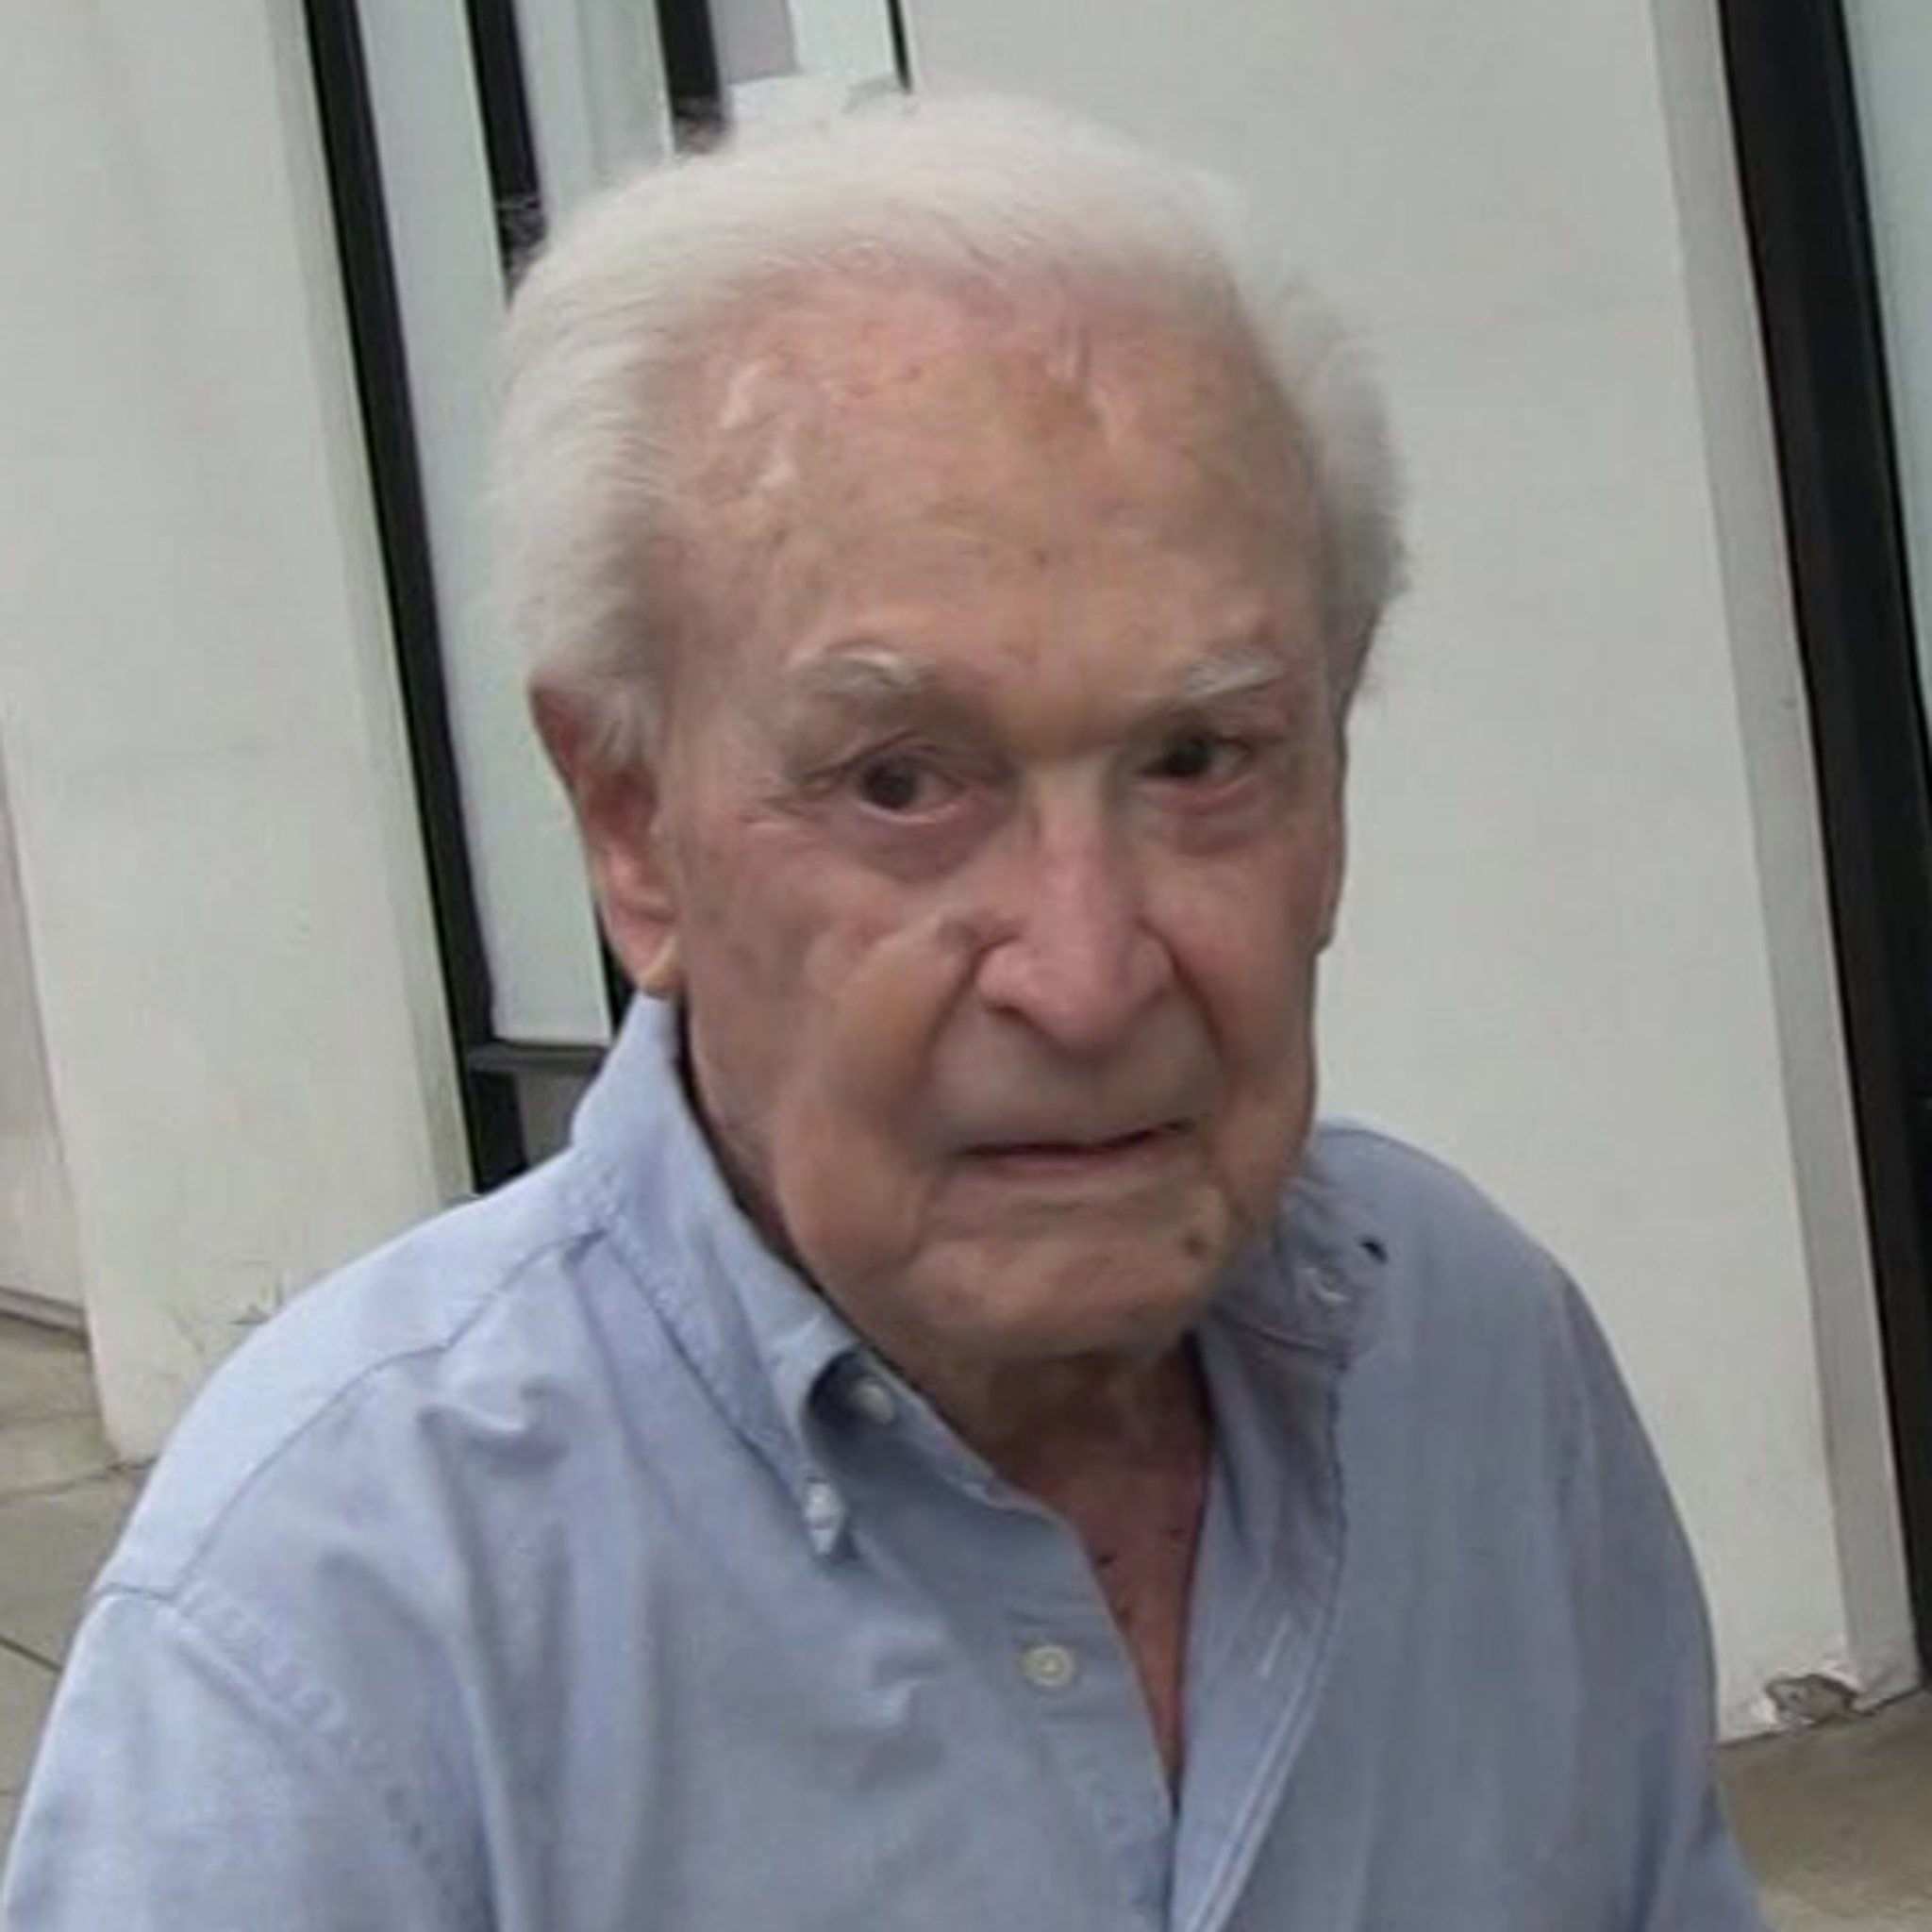 Ambulance Called to Bob Barker's Home After Nasty Slip and Fall